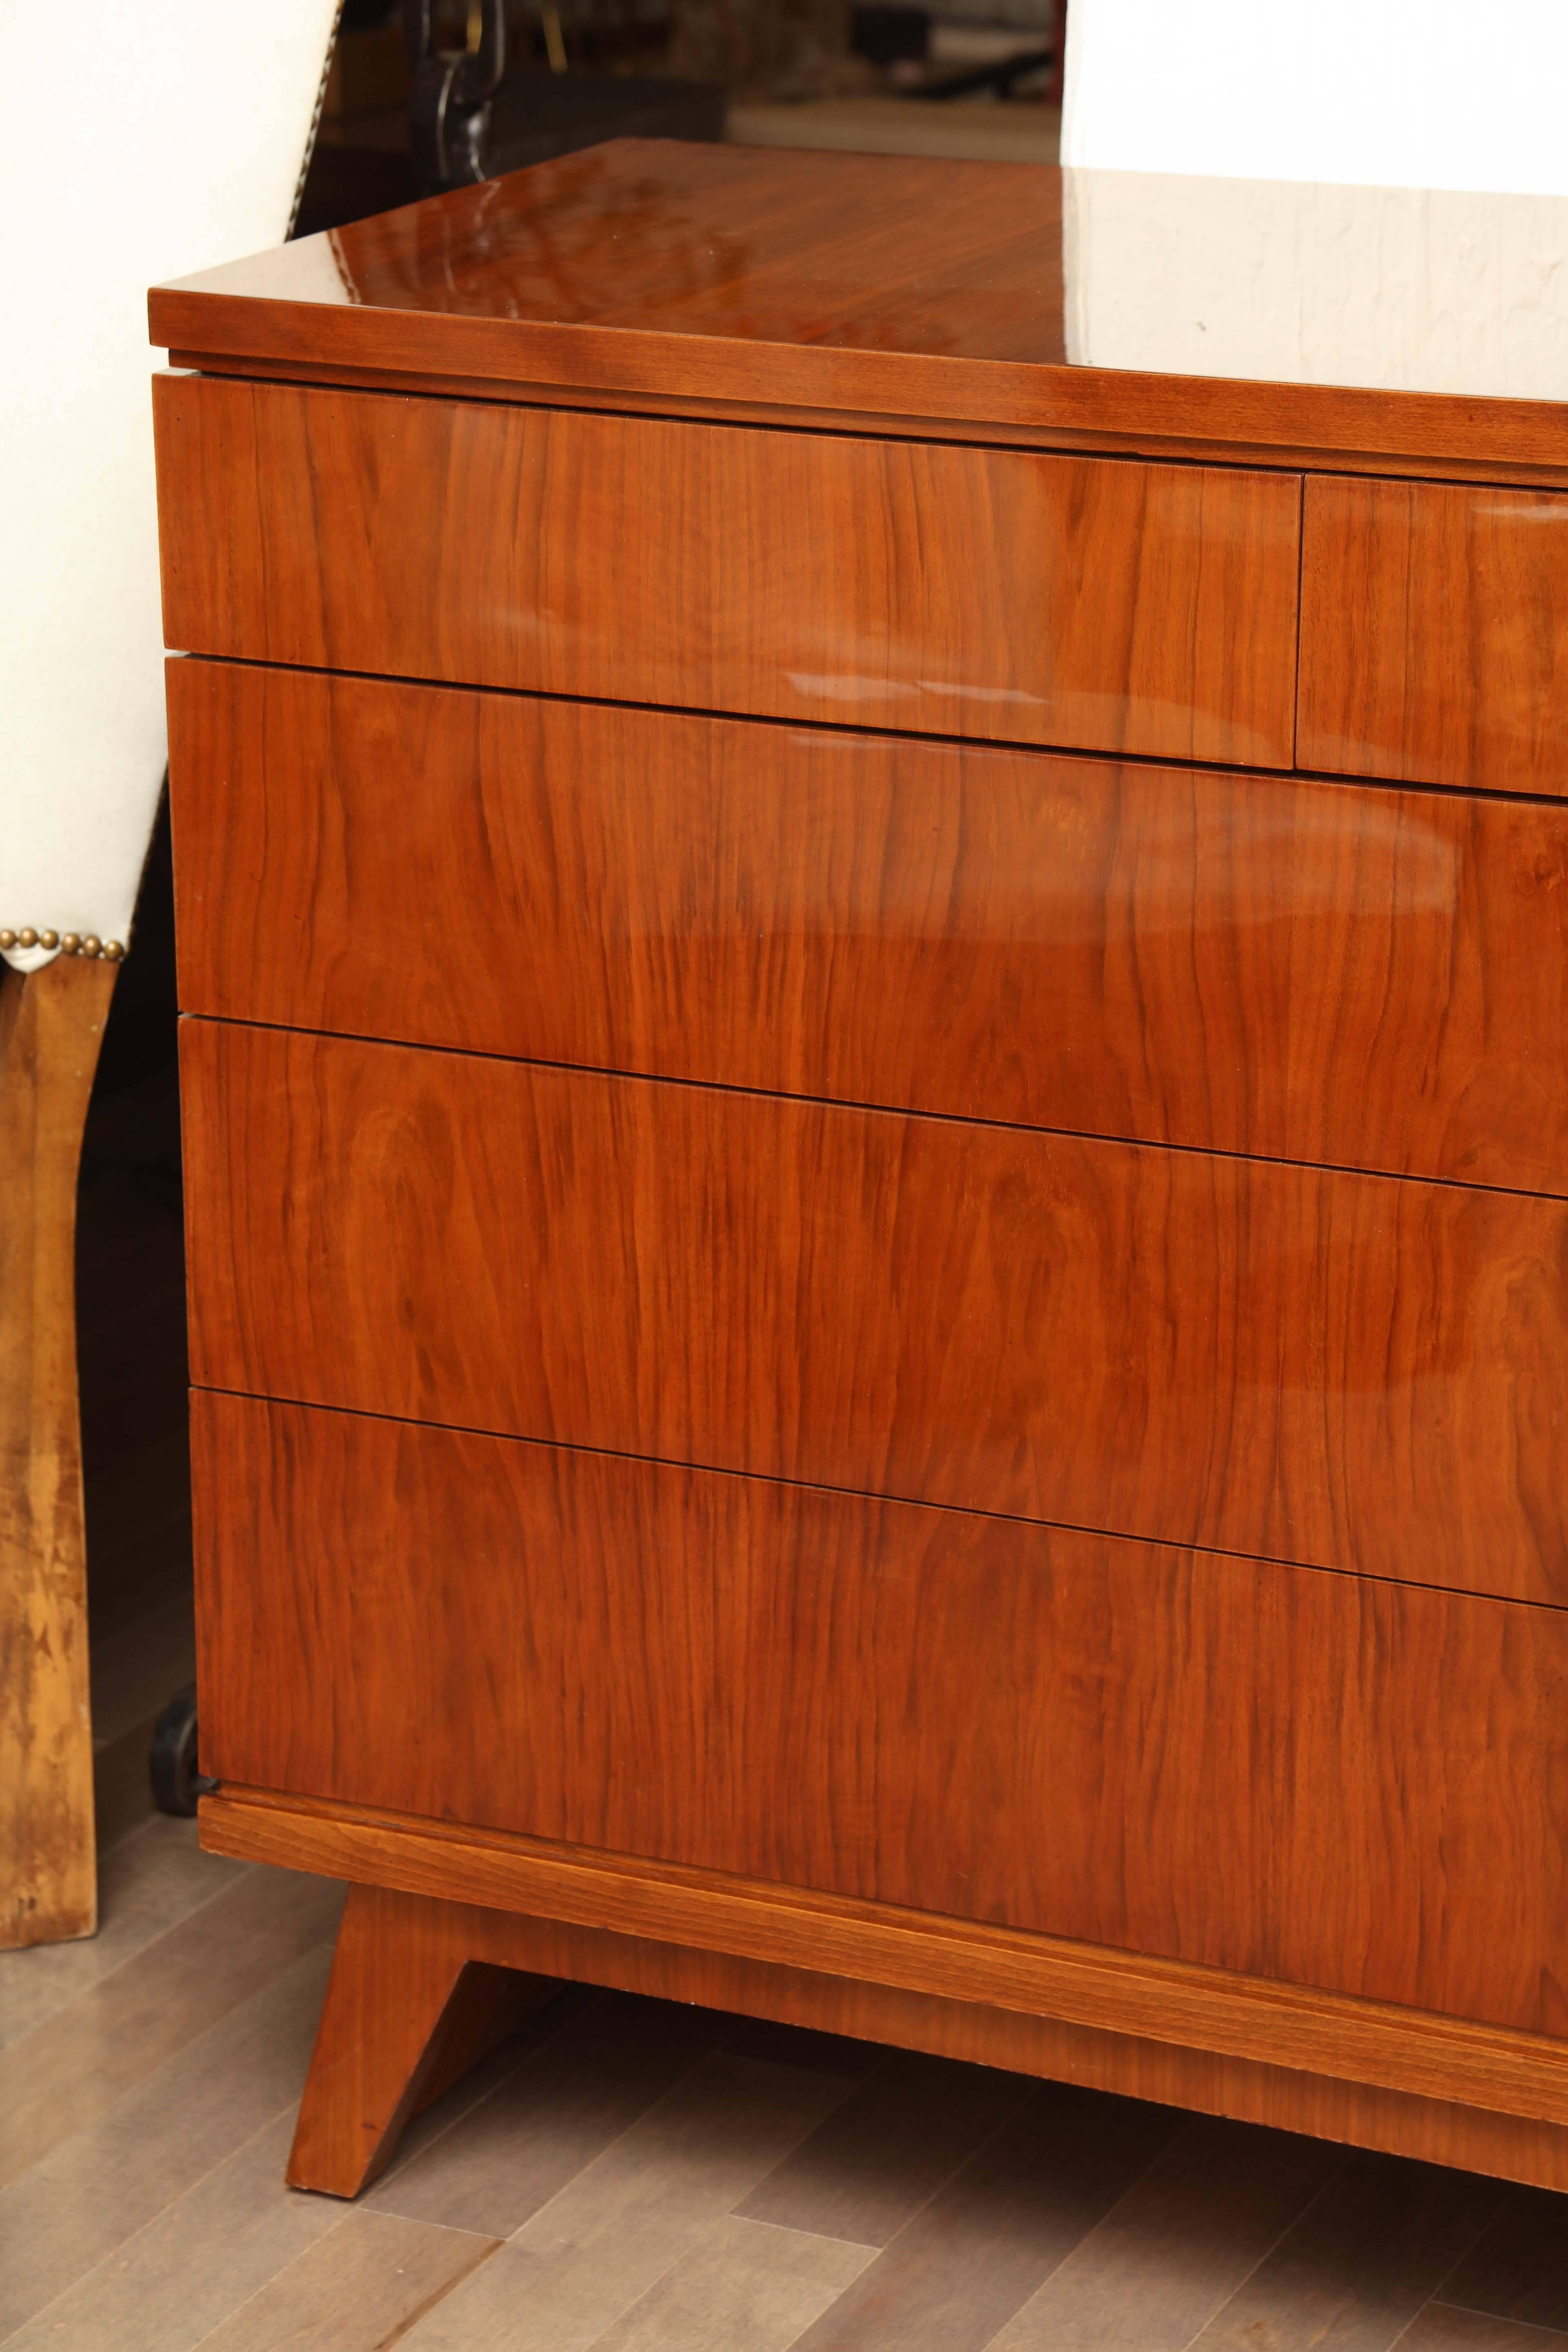 Art Deco chest with five drawers in a lacquered walnut finish, circa 1940s.